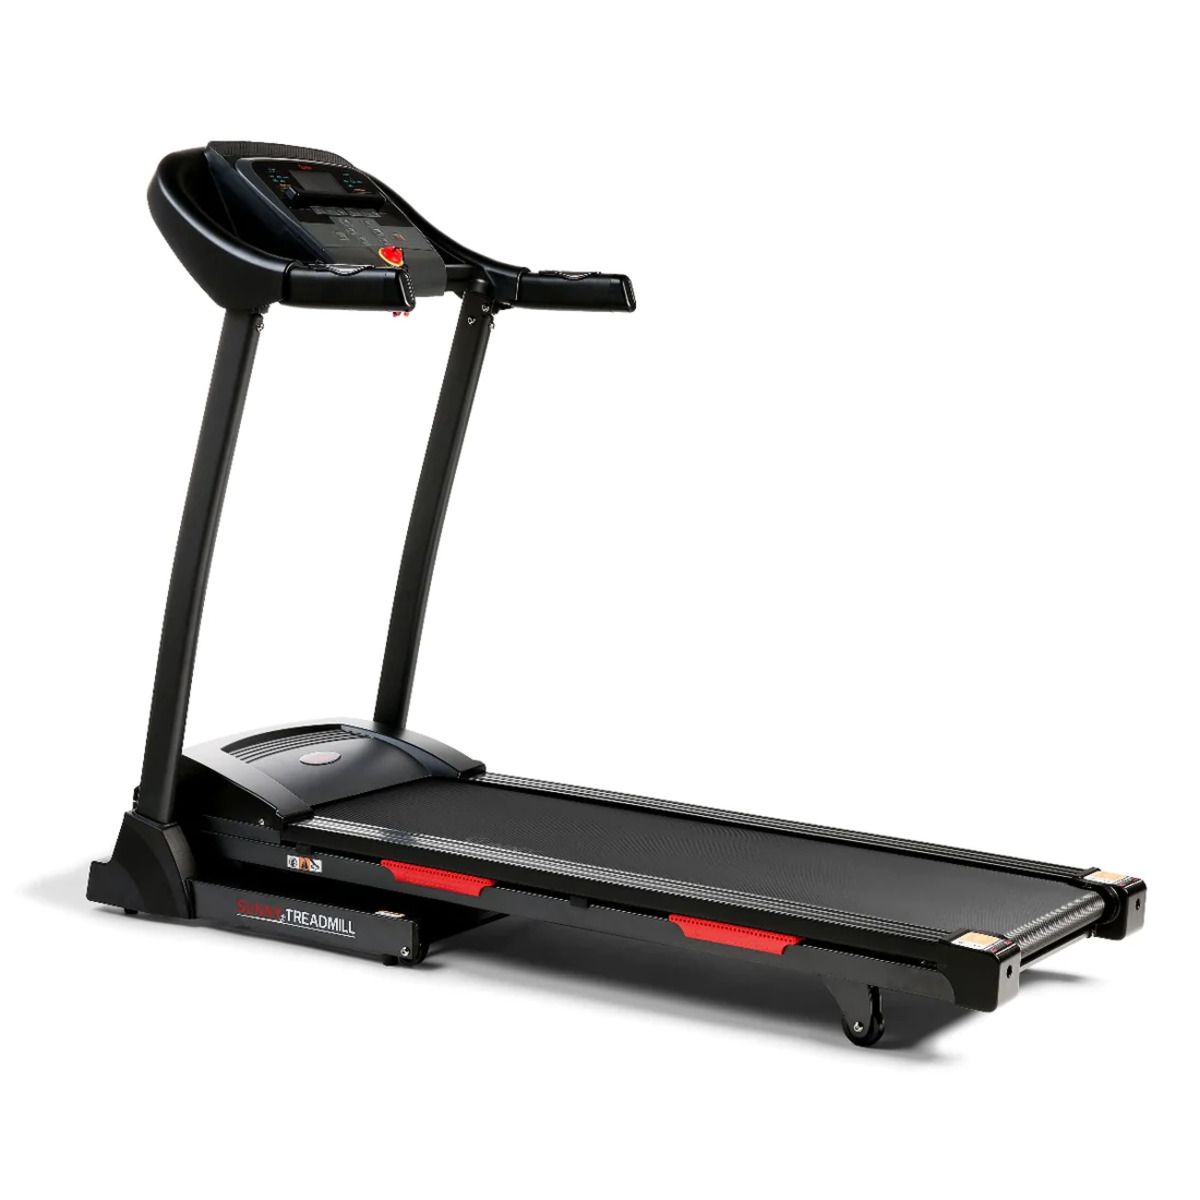 The Sunny Health & Fitness Treadmill against a white background